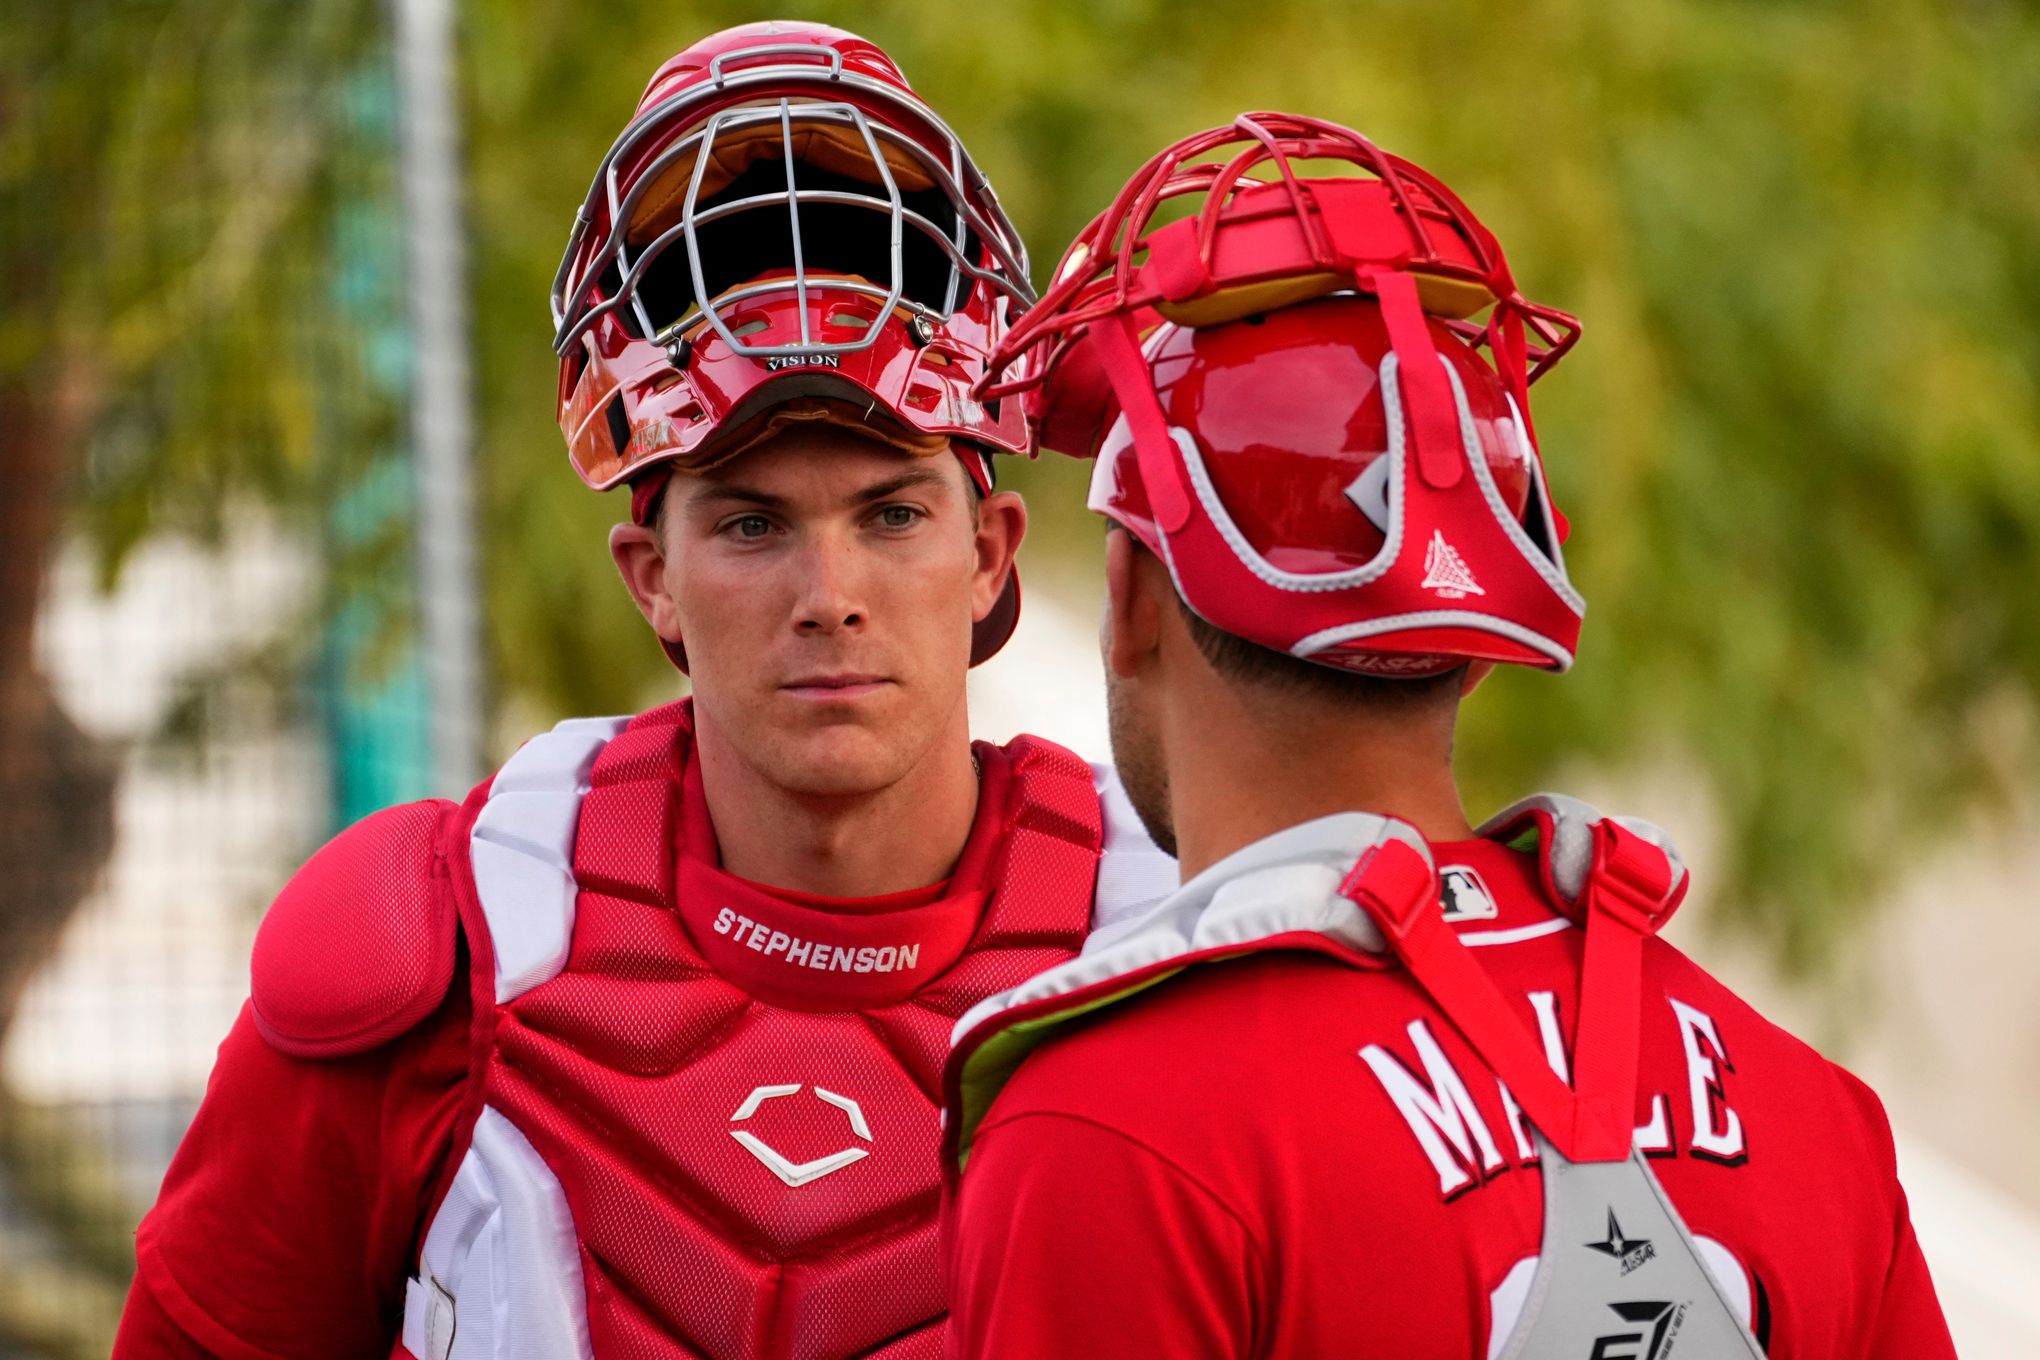 Reds will give Stephenson time off from rigors of catching